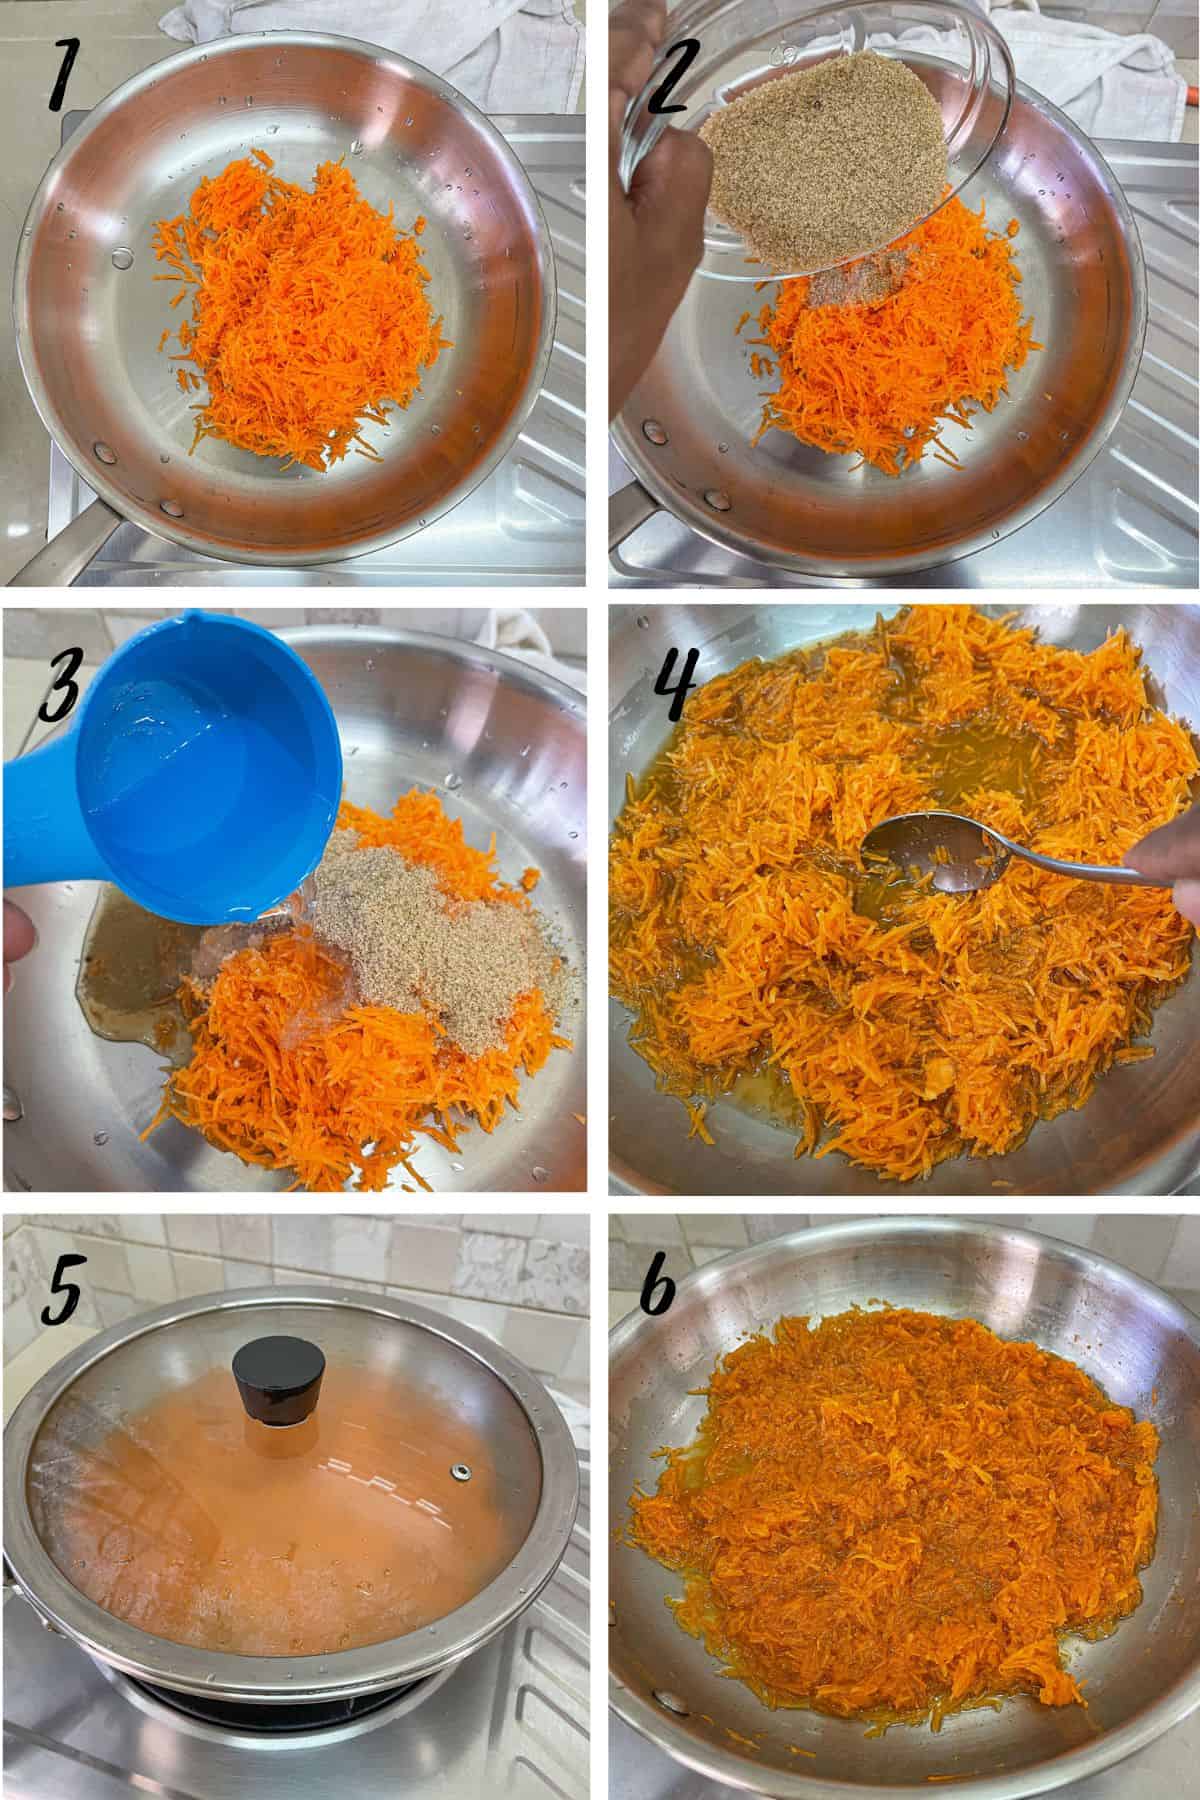 A poster of 6 images showing how to grate and cook carrots.